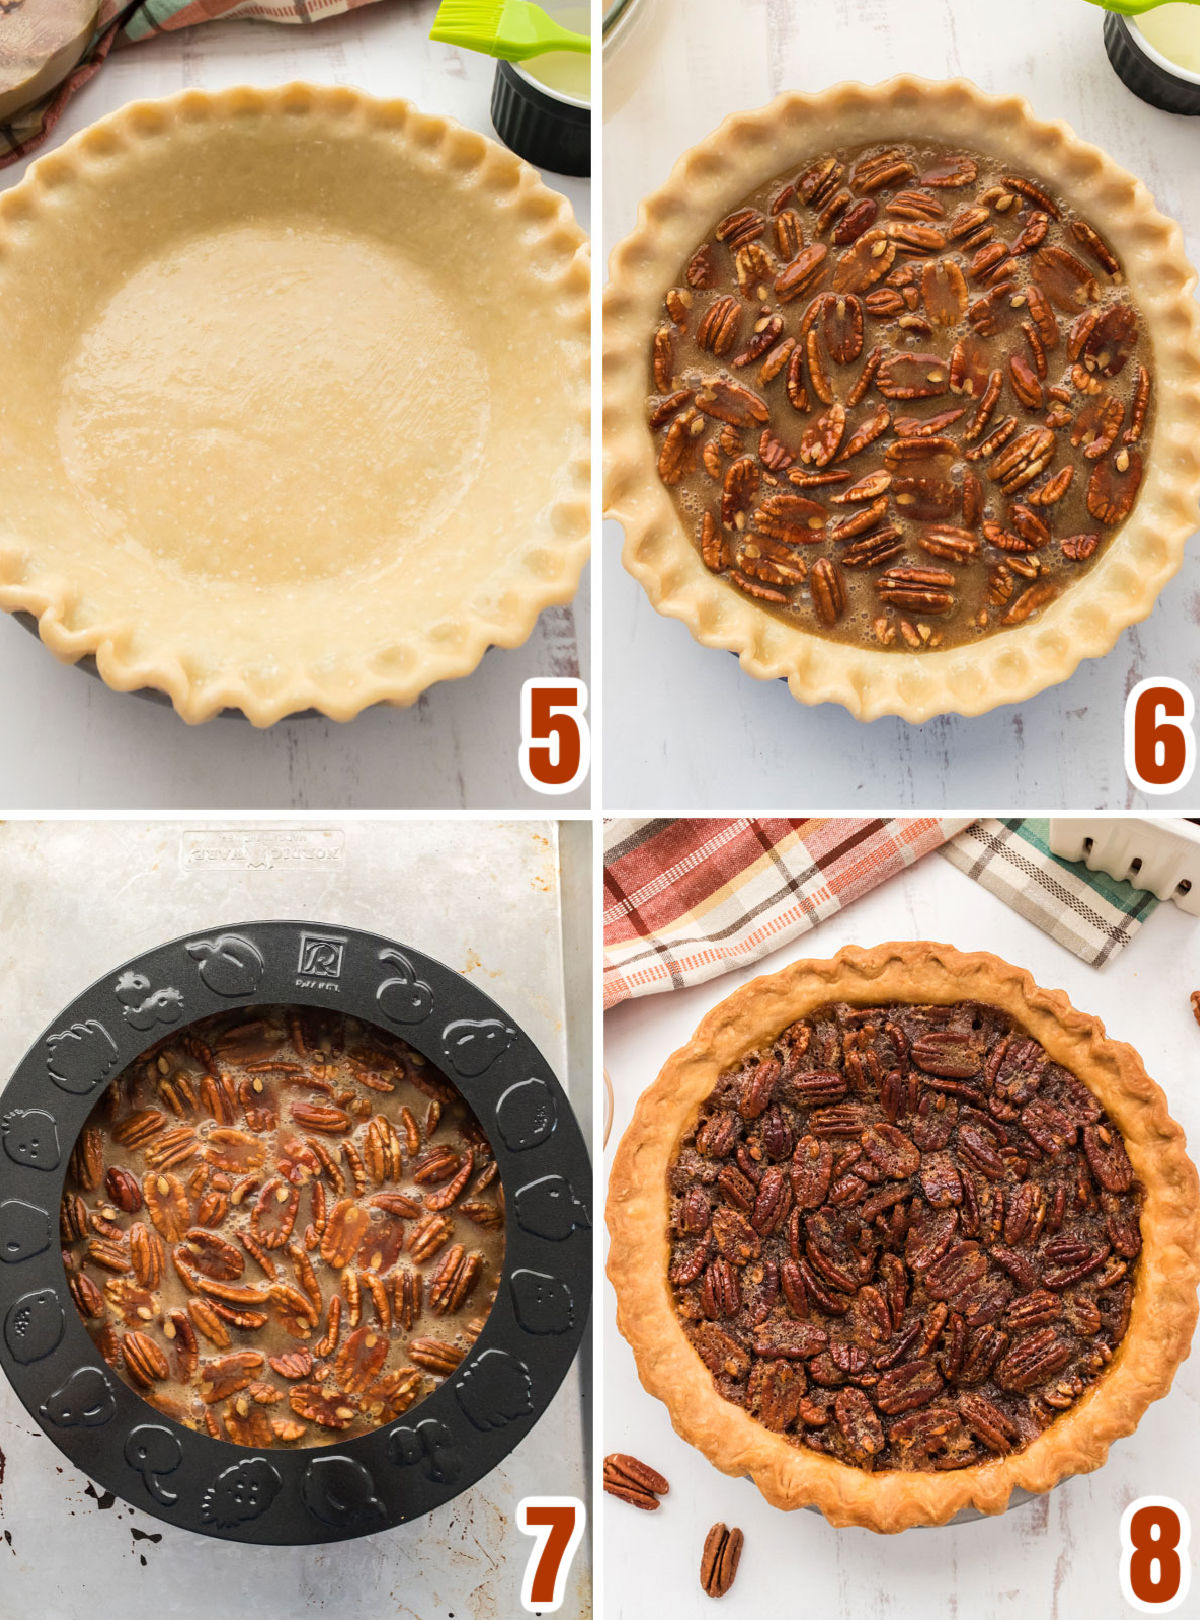 Collage image showing the steps for baking the Pecan Pie recipe.